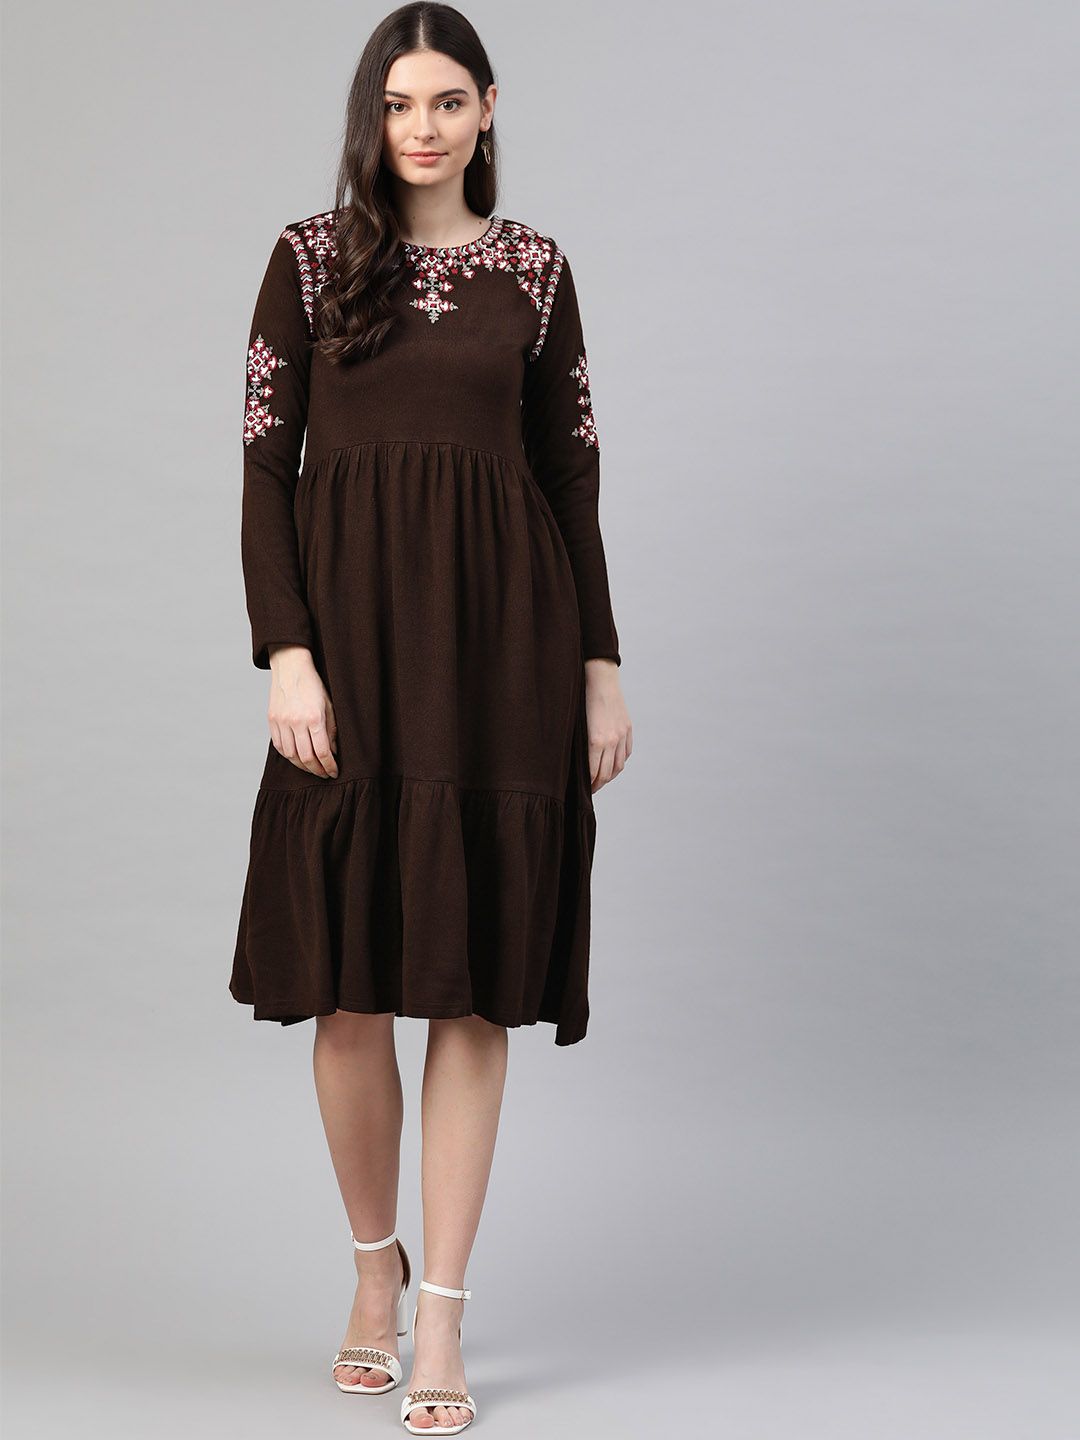 W Women Brown Embroidered Detail A-Line Winter Dress Price in India